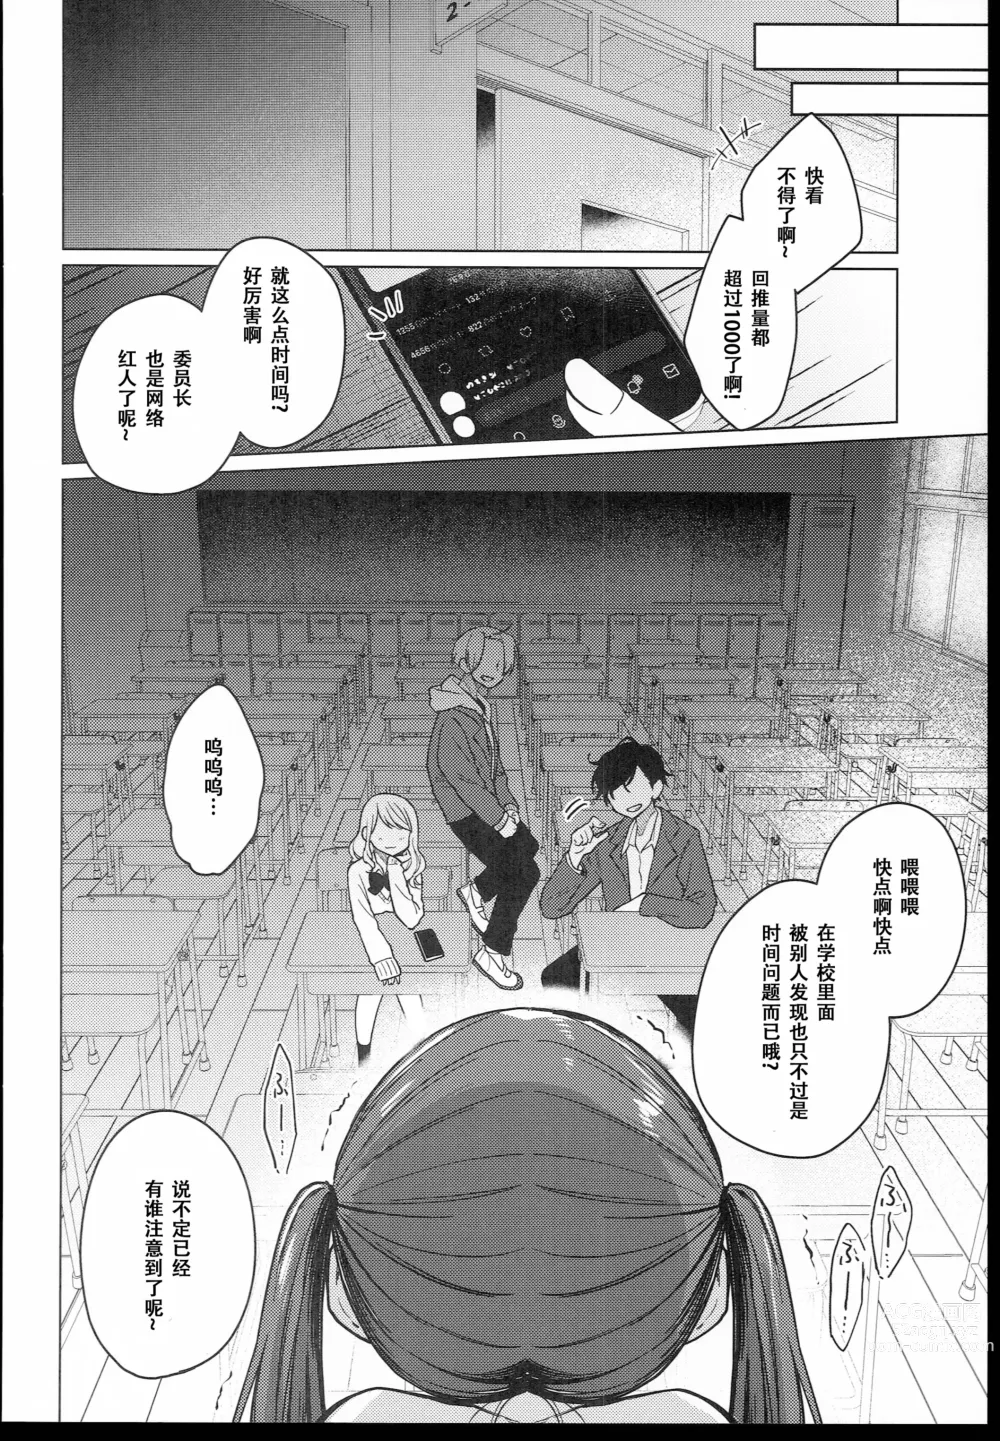 Page 8 of doujinshi 委員長は今日からみんなのオモチャ～終わった学校生活編～